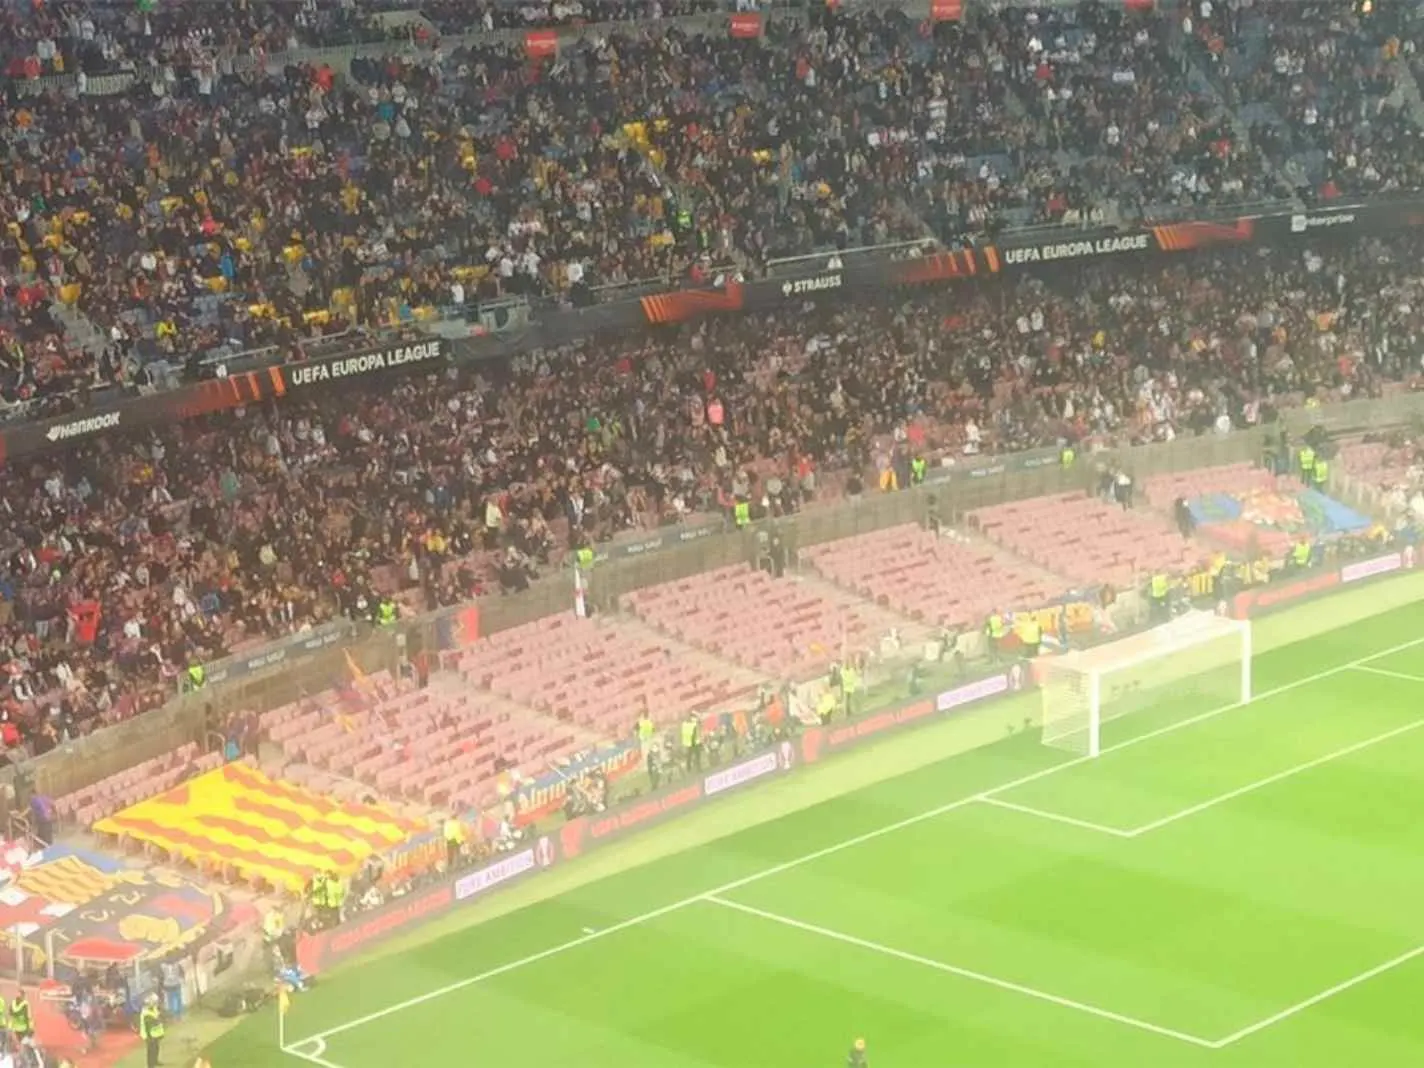 Photo of the missing Animation Stand at Camp Nou during Cadiz loss